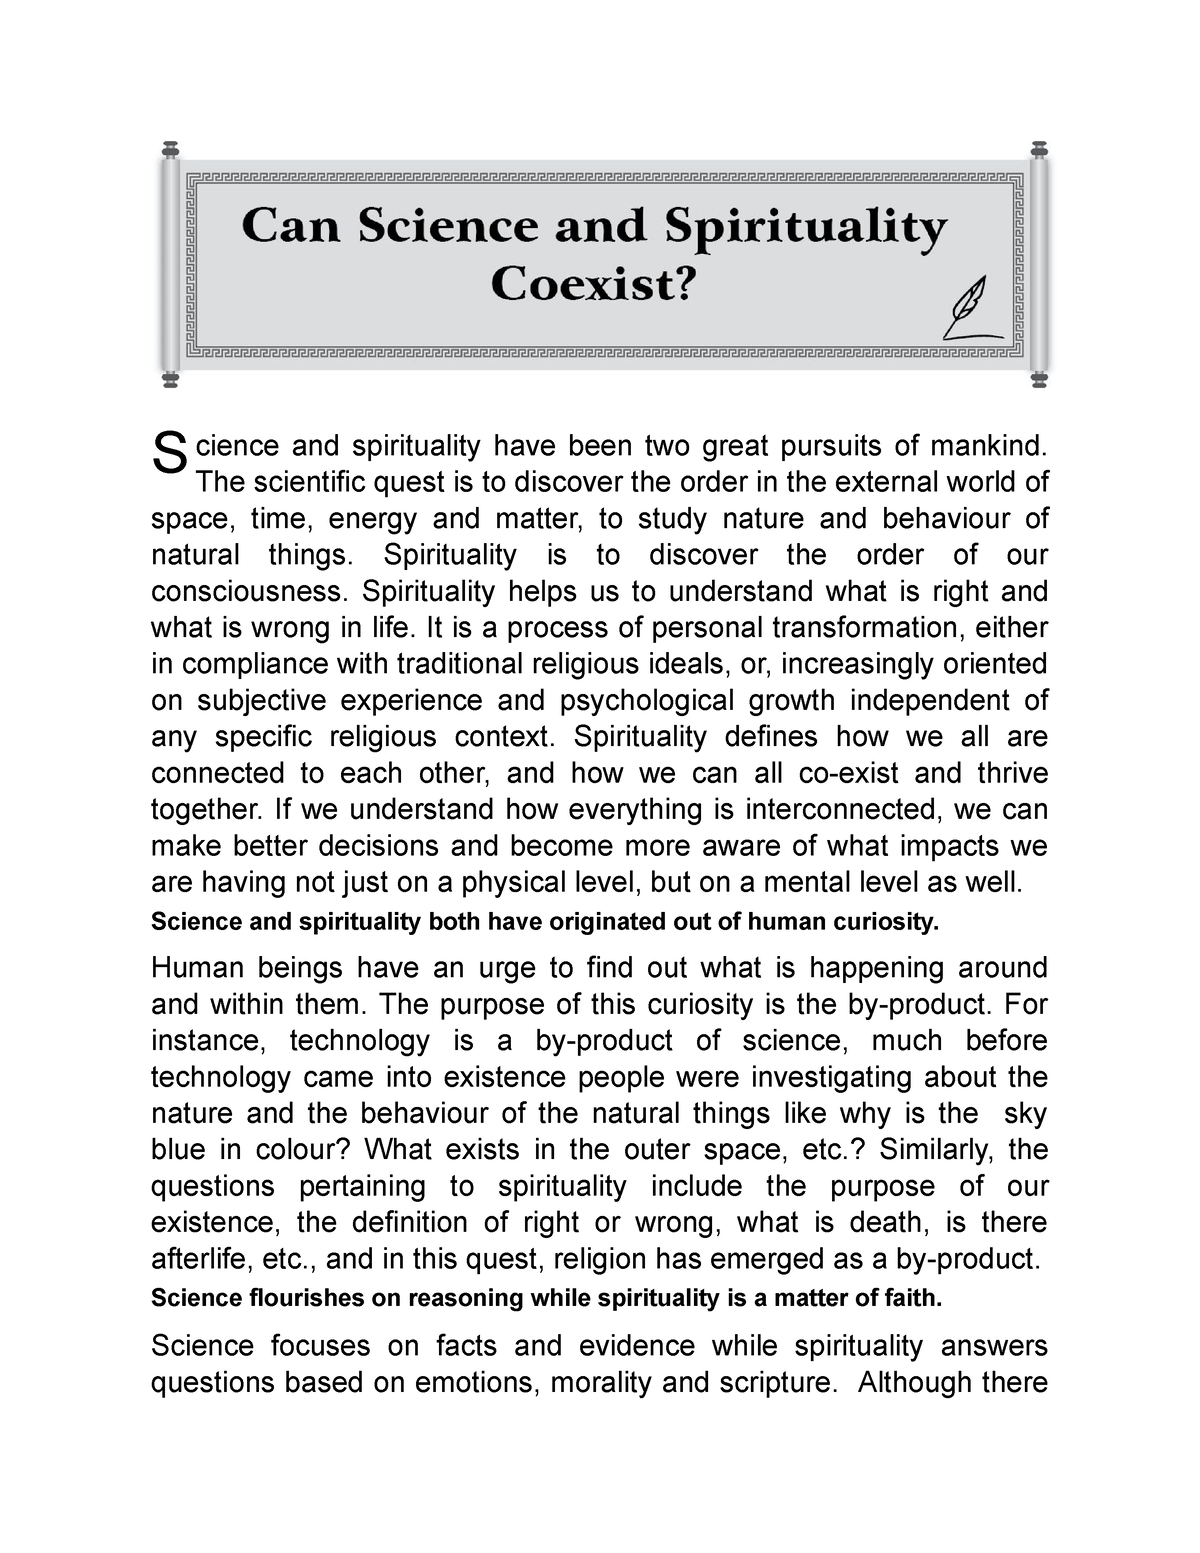 essay on science and spirituality